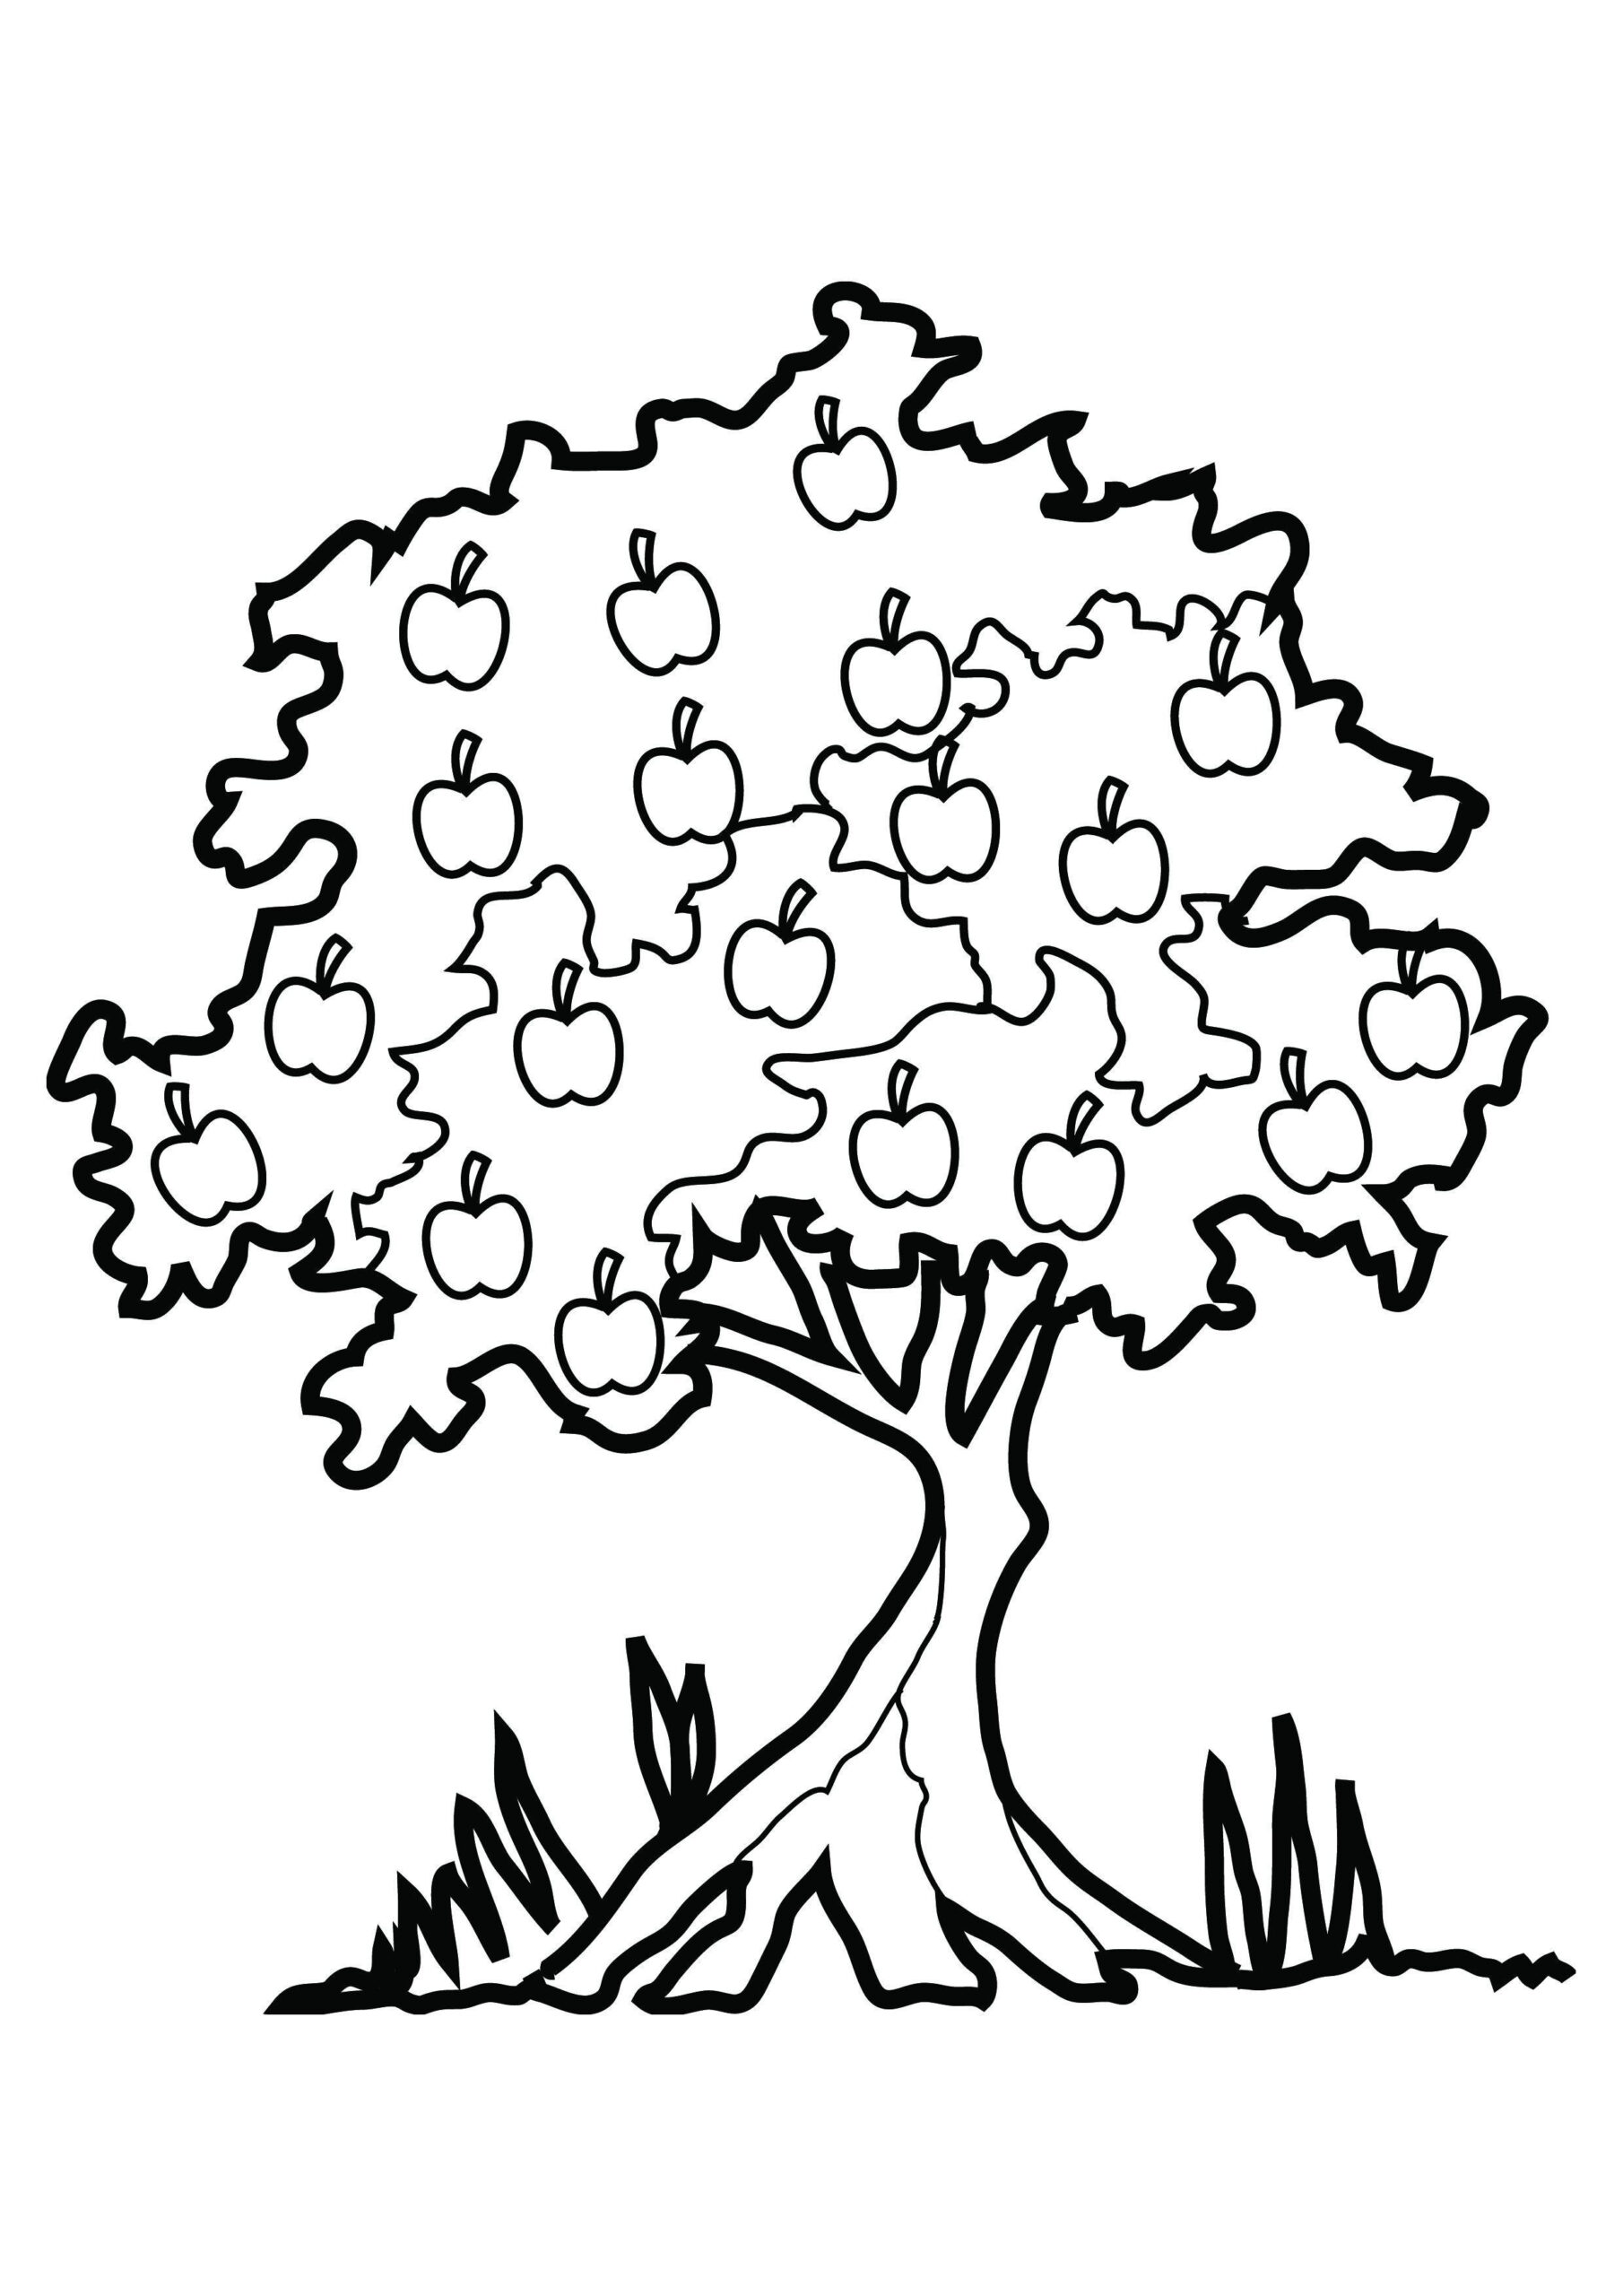 Free Printable Tree Coloring Pages For Kids - Free Printable Pictures Of Trees